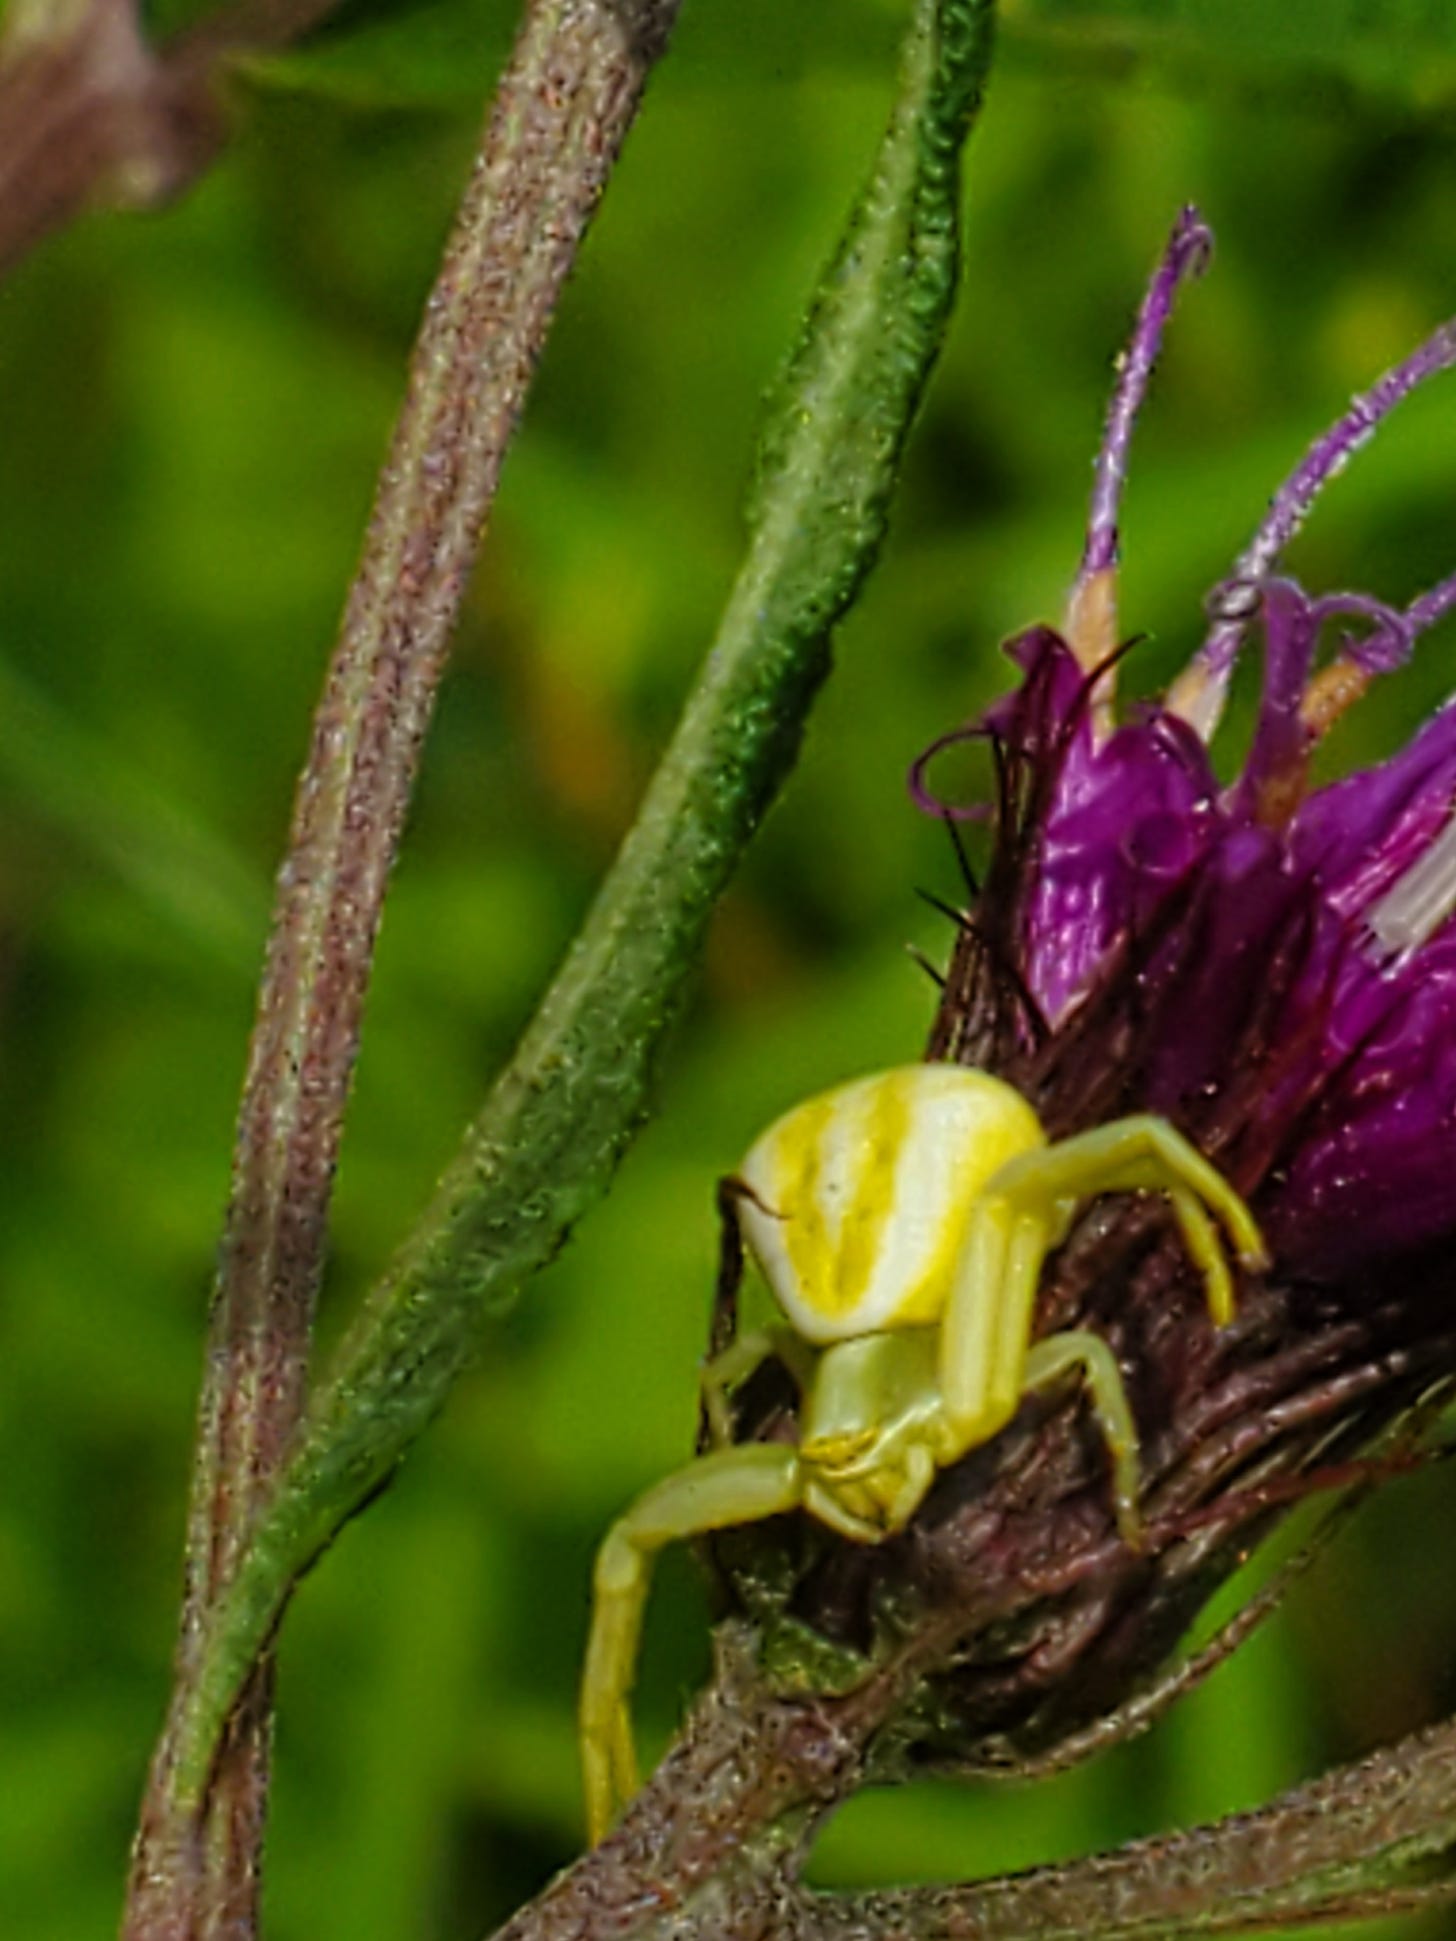 A crab spider at the base of a purple flower